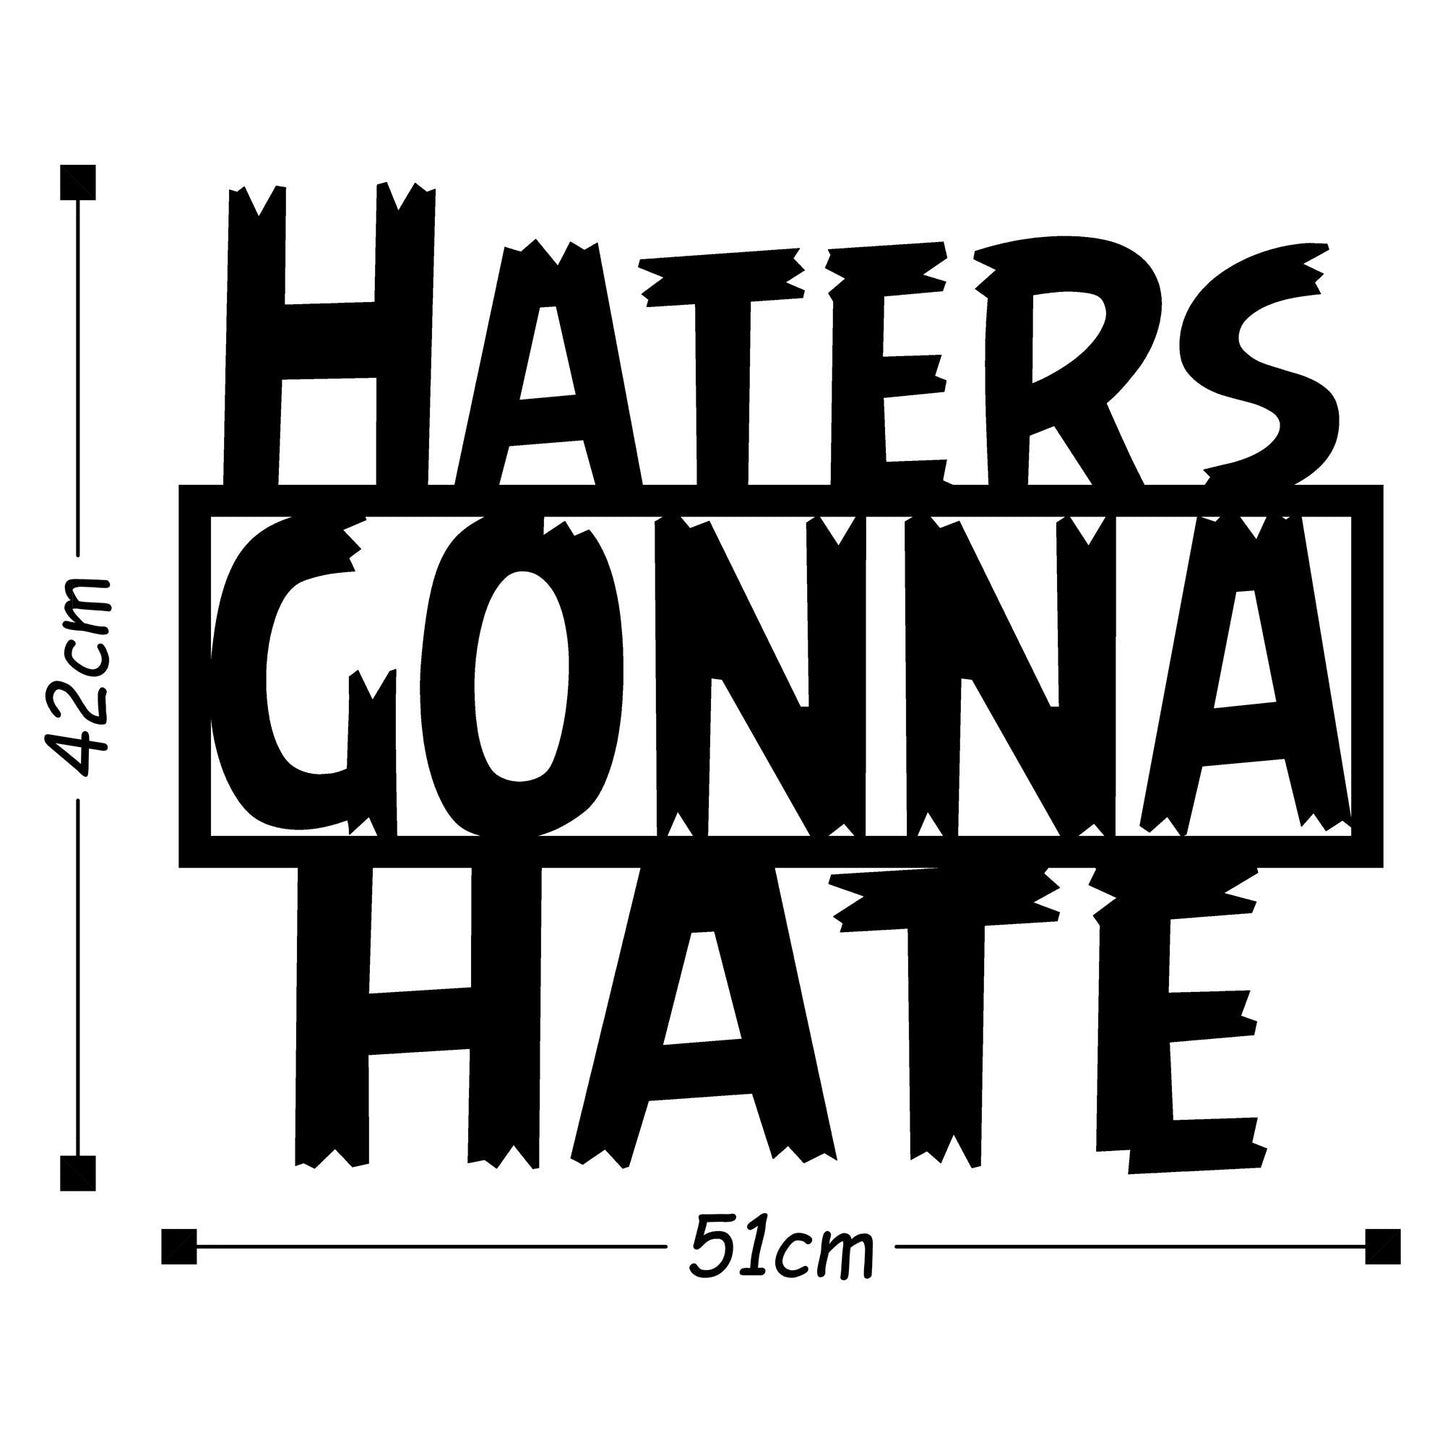 Haters Gonna Hate - Decorative Metal Wall Accessory